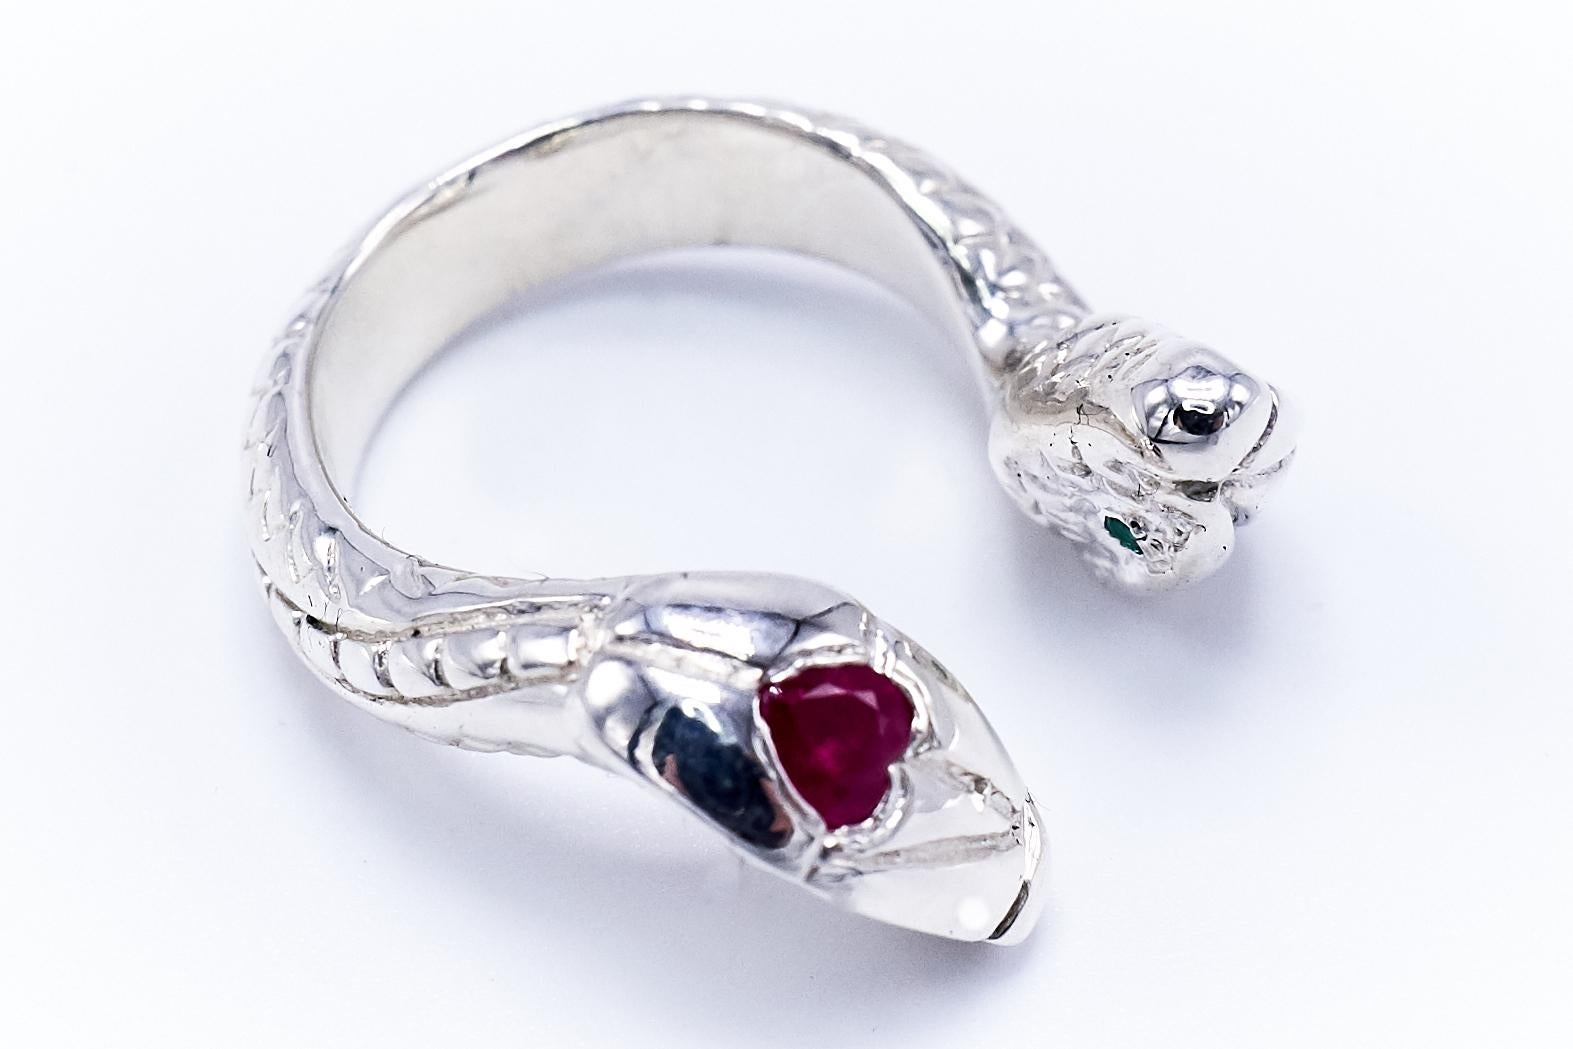 White Diamond Emerald Heart Ruby Snake Ring Silver Cocktail Ring J Dauphin

This ring has a big heart shaped ruby and emerald and white diamond eyes ( 2 snake heads )

J DAUPHIN Statement Cocktail Ring 